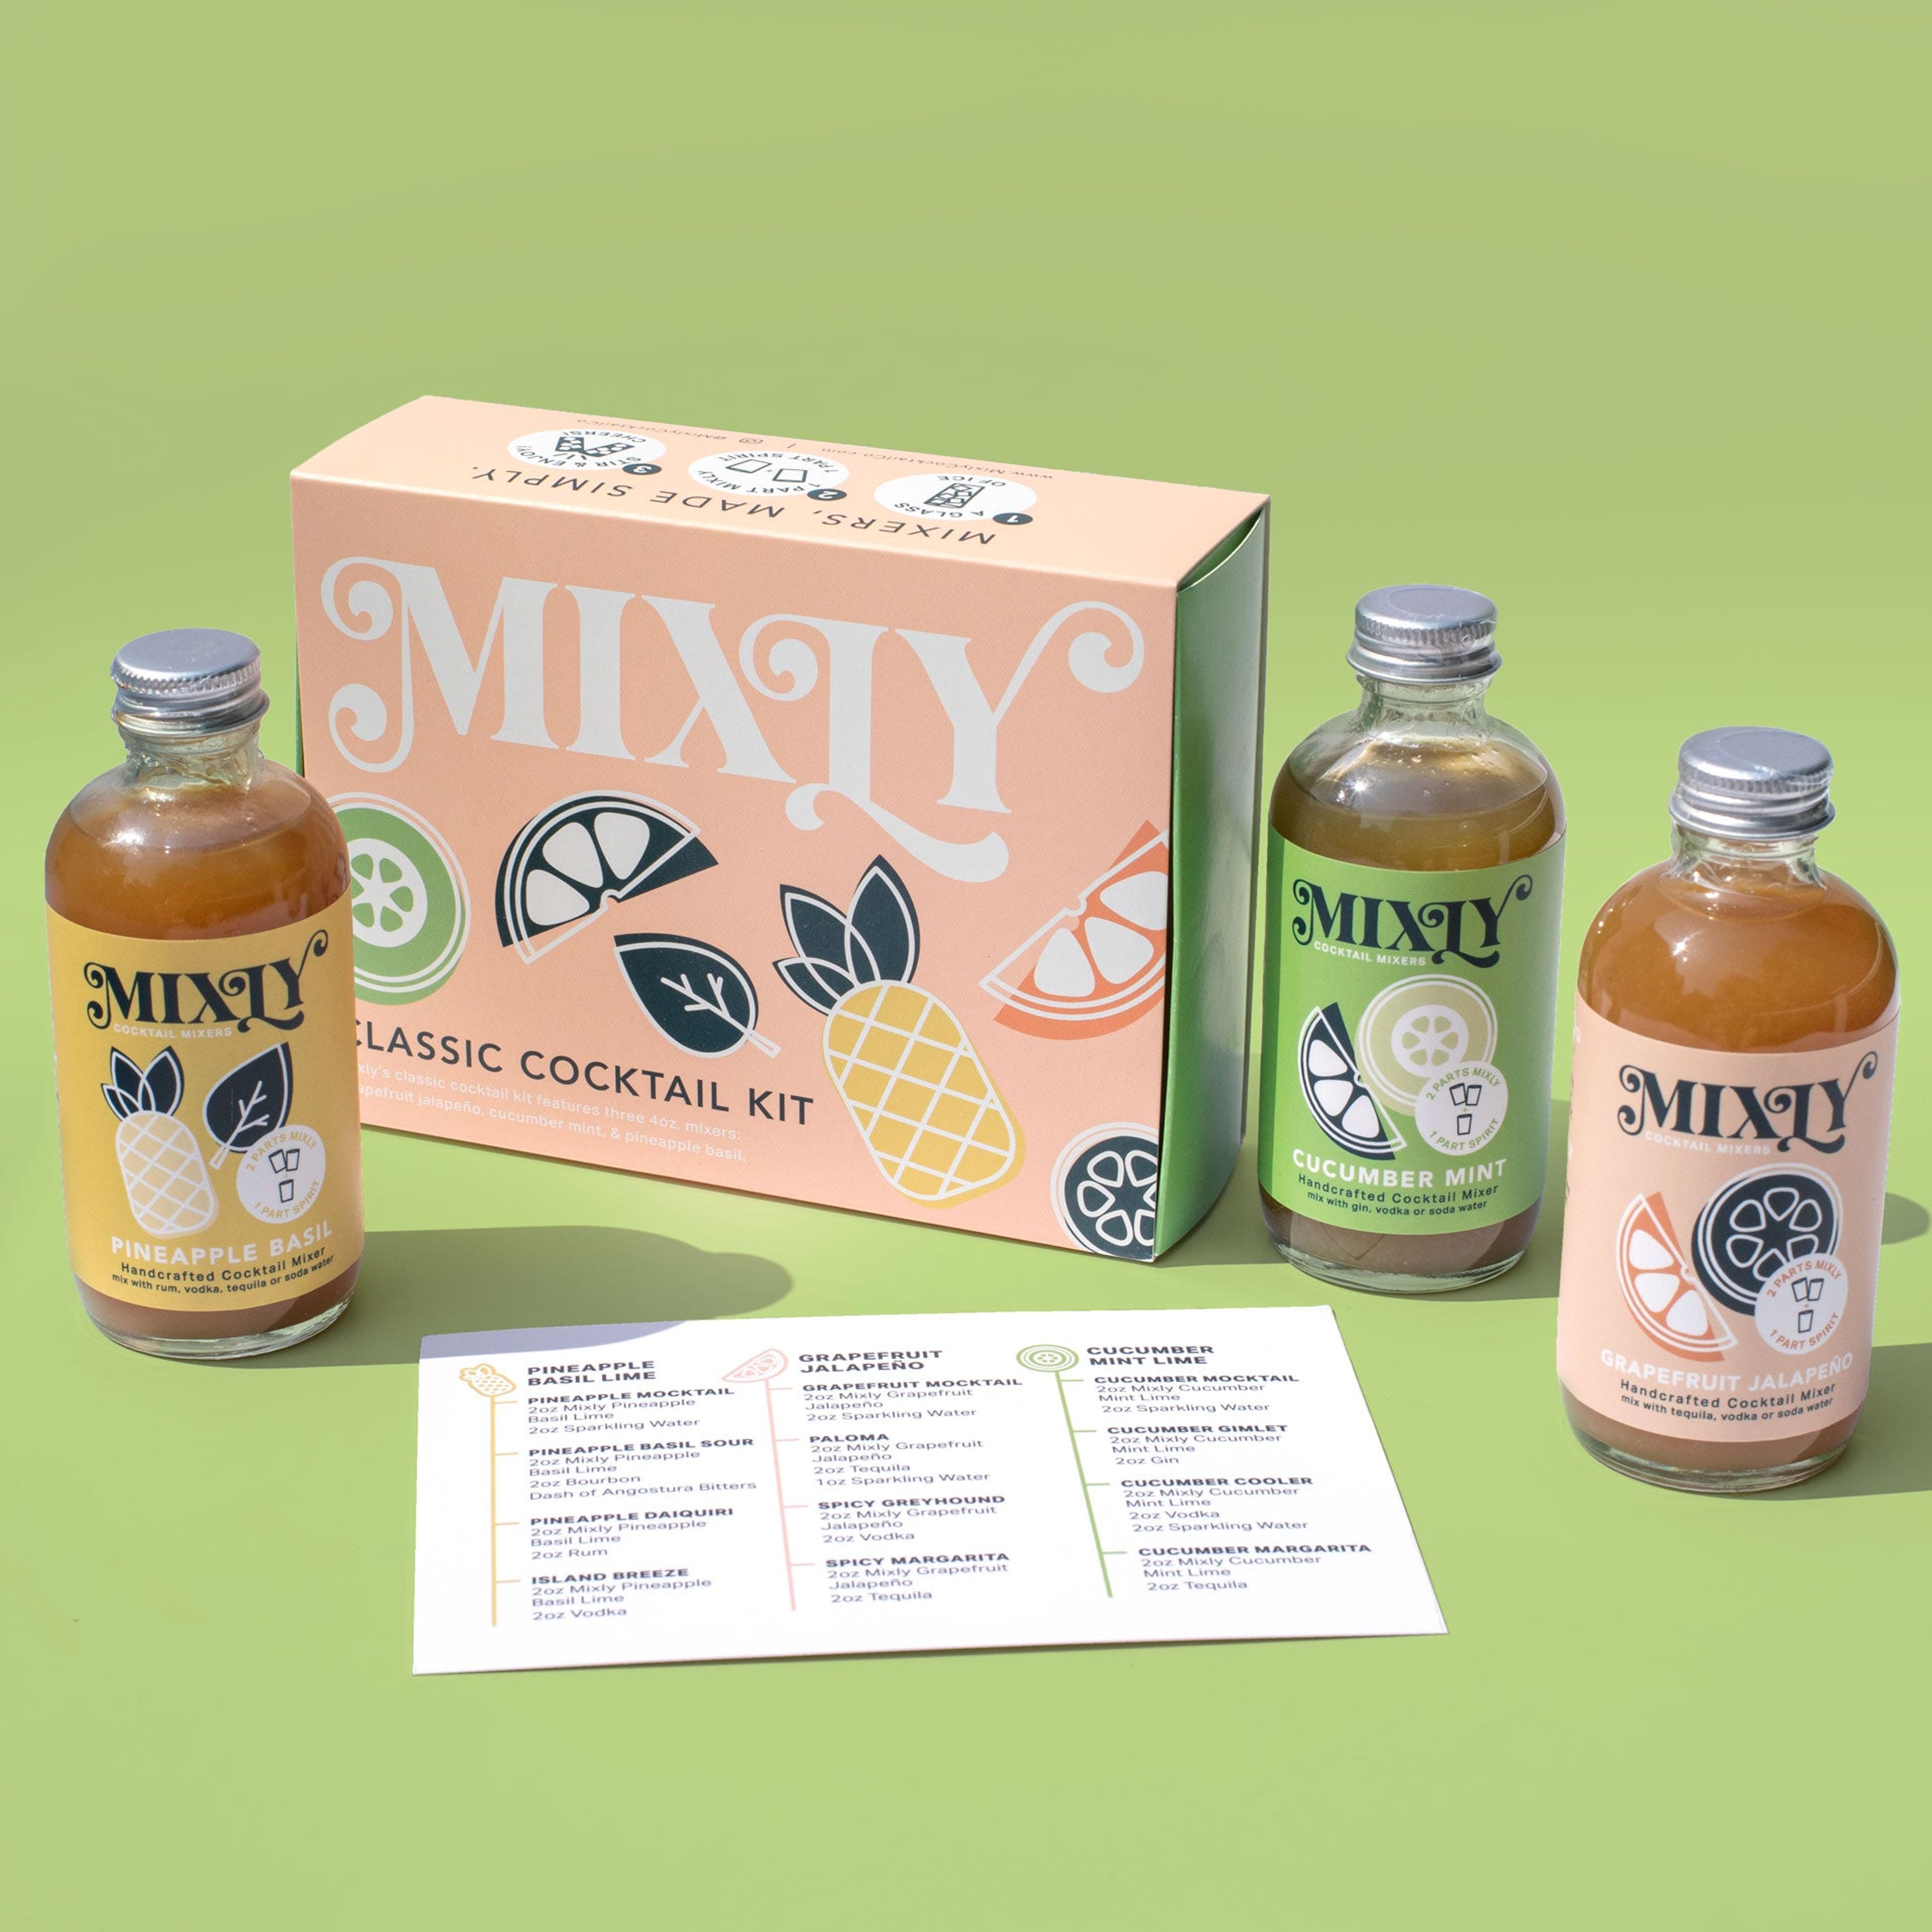 New! Classic Cocktail Kit